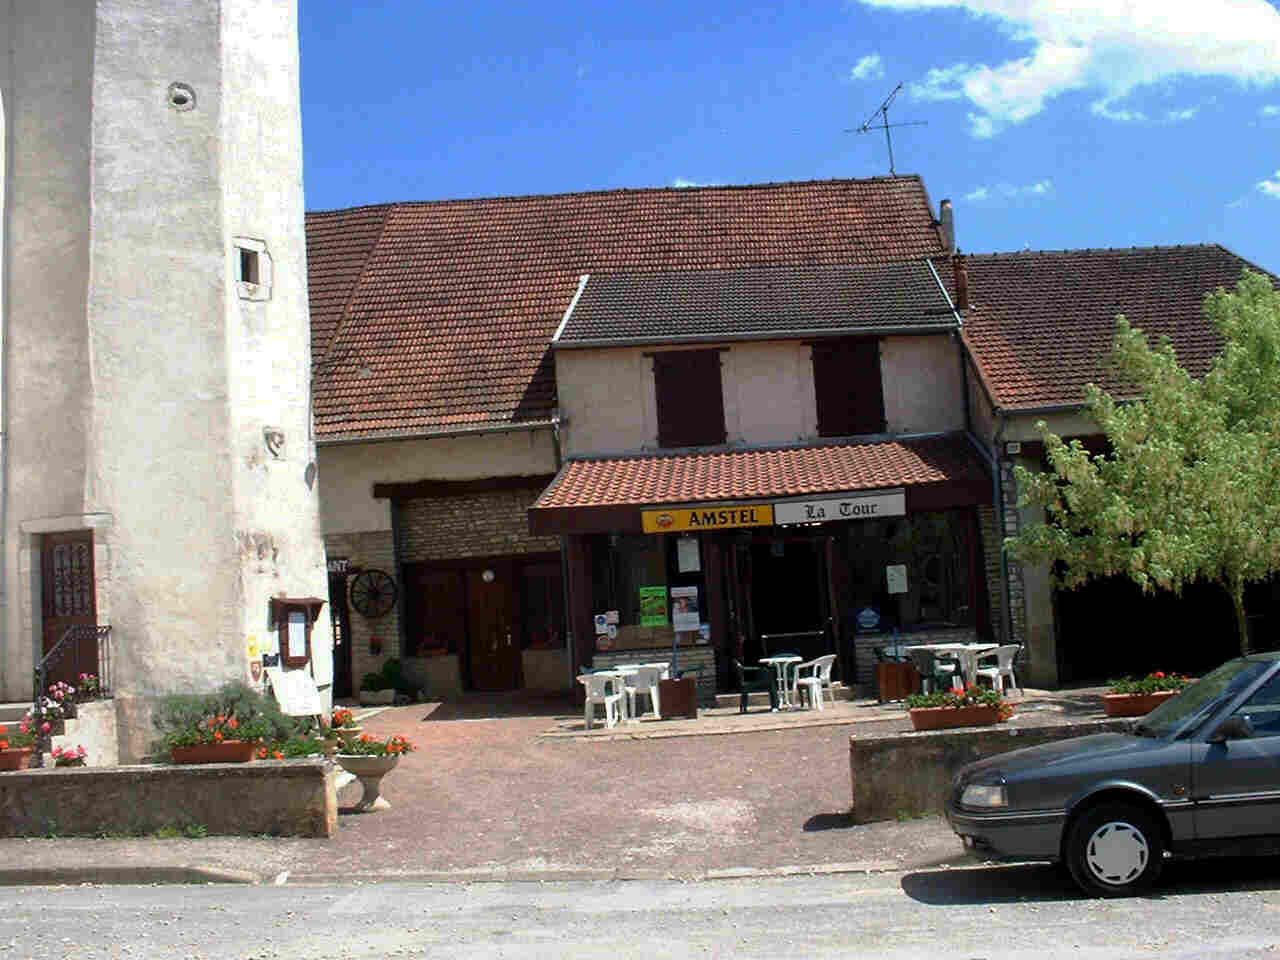 The hotel restaurant, Fontaine-Francaise